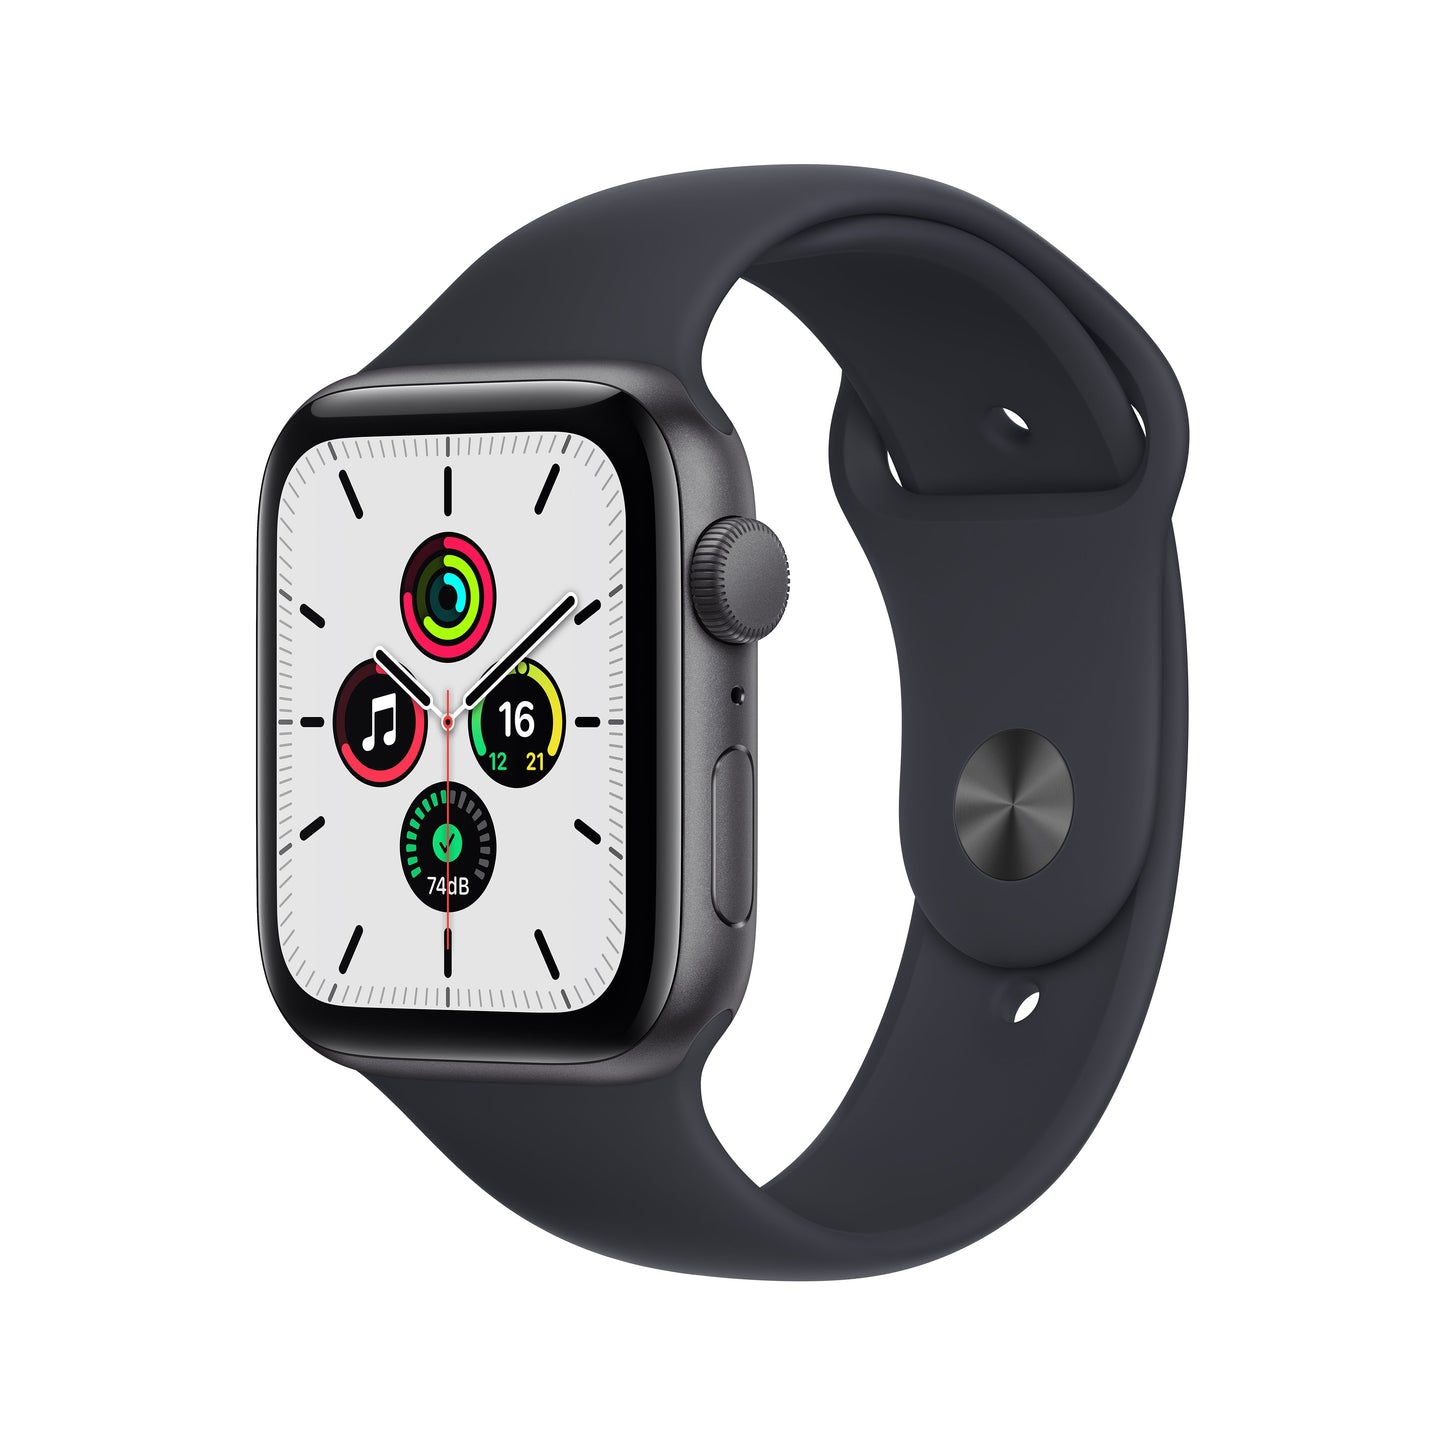 Apple Watch SE Cellular 44mm Space Gray Aluminium Case with Black Sport Band